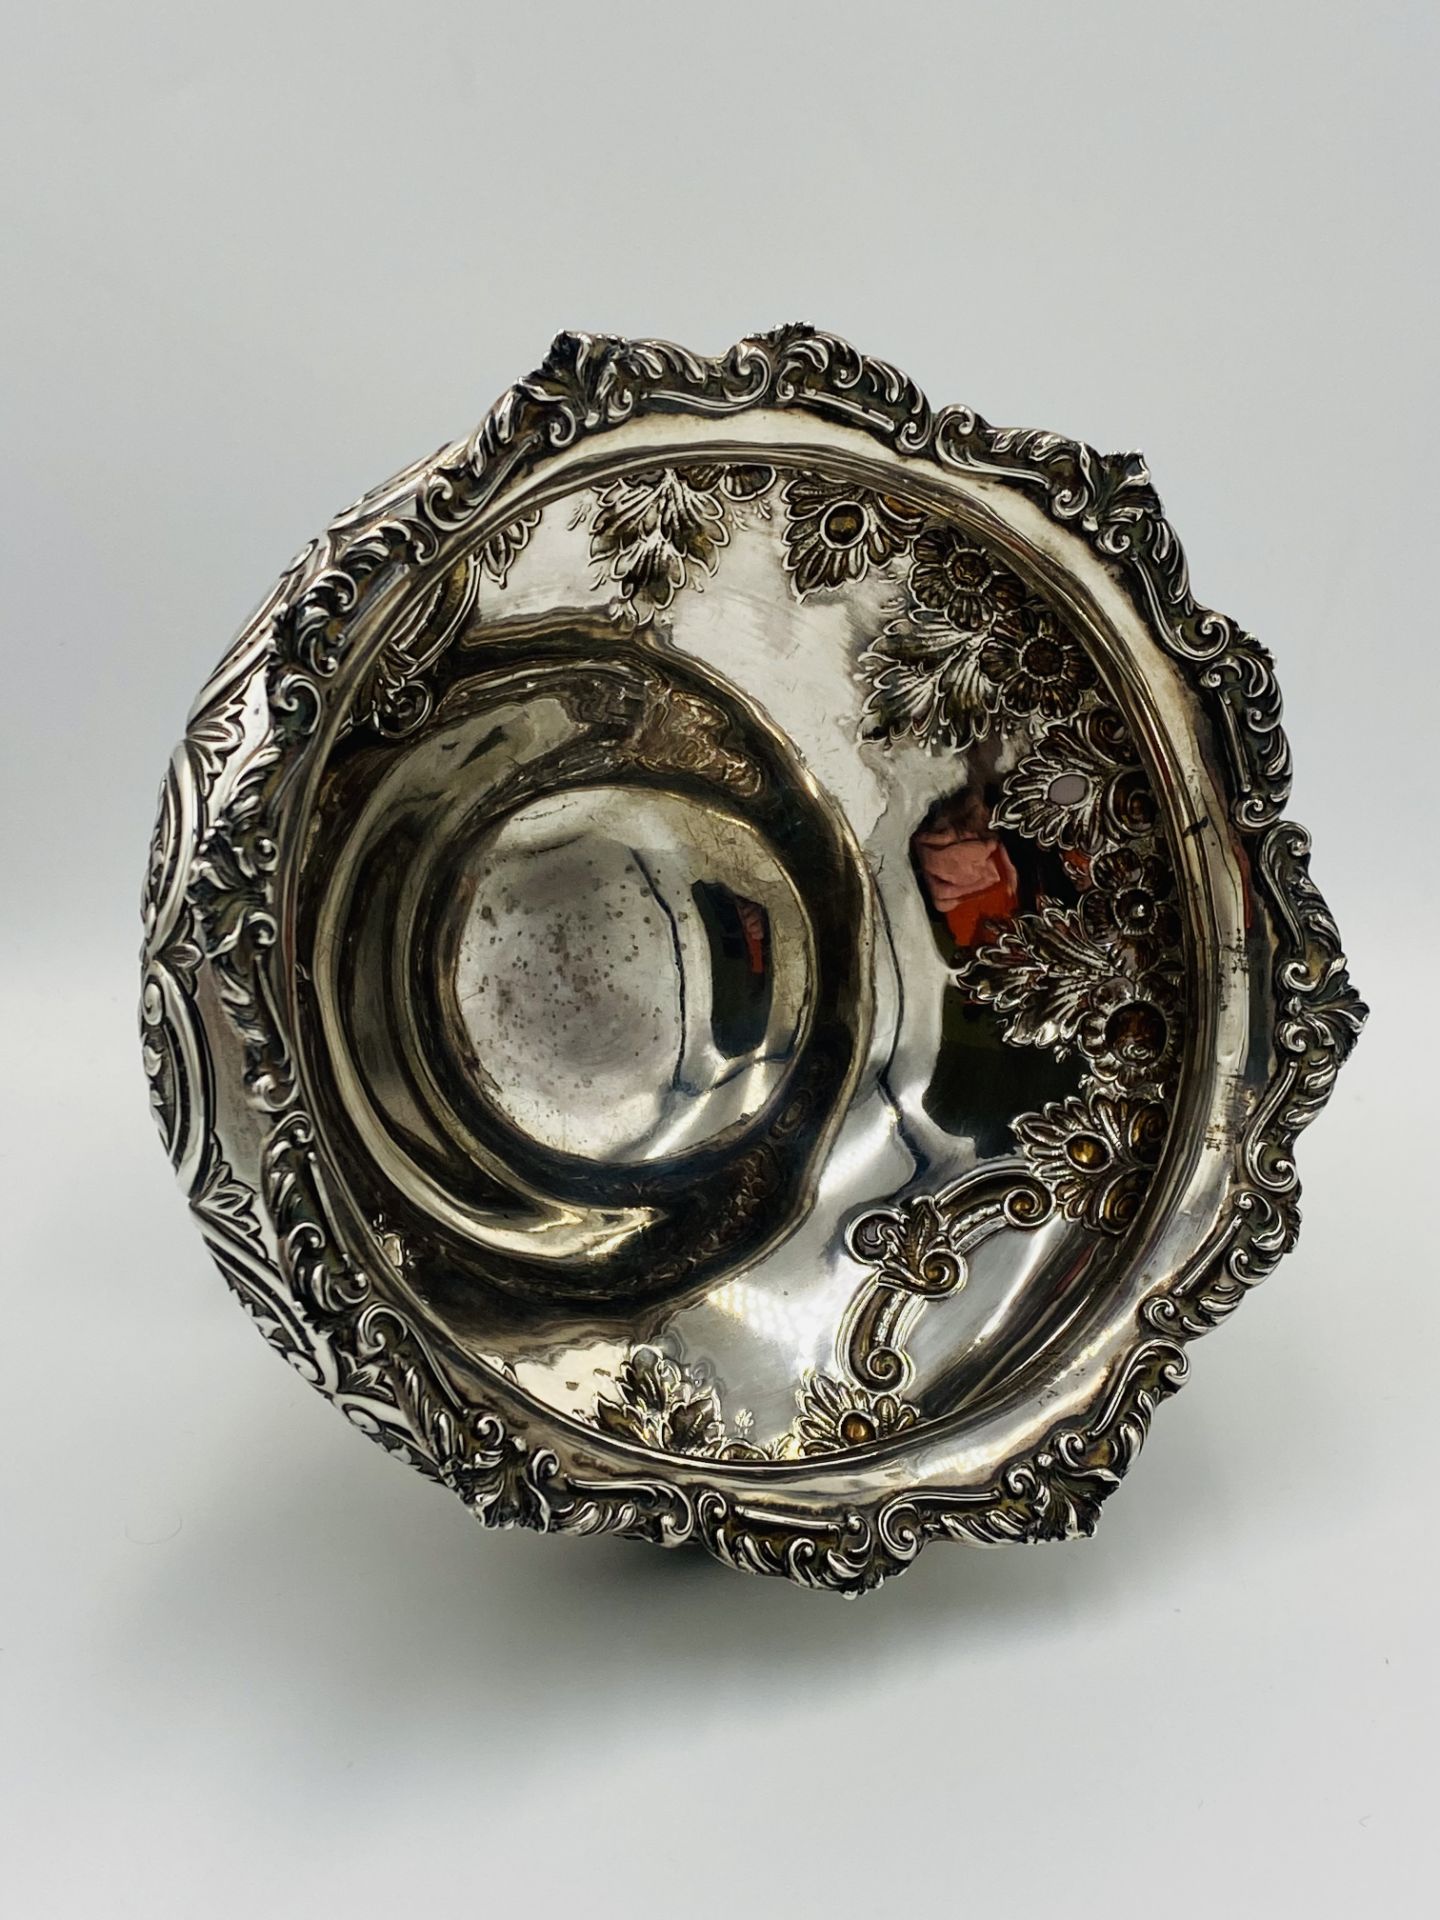 Silver bowl with repousse decoration - Image 7 of 9